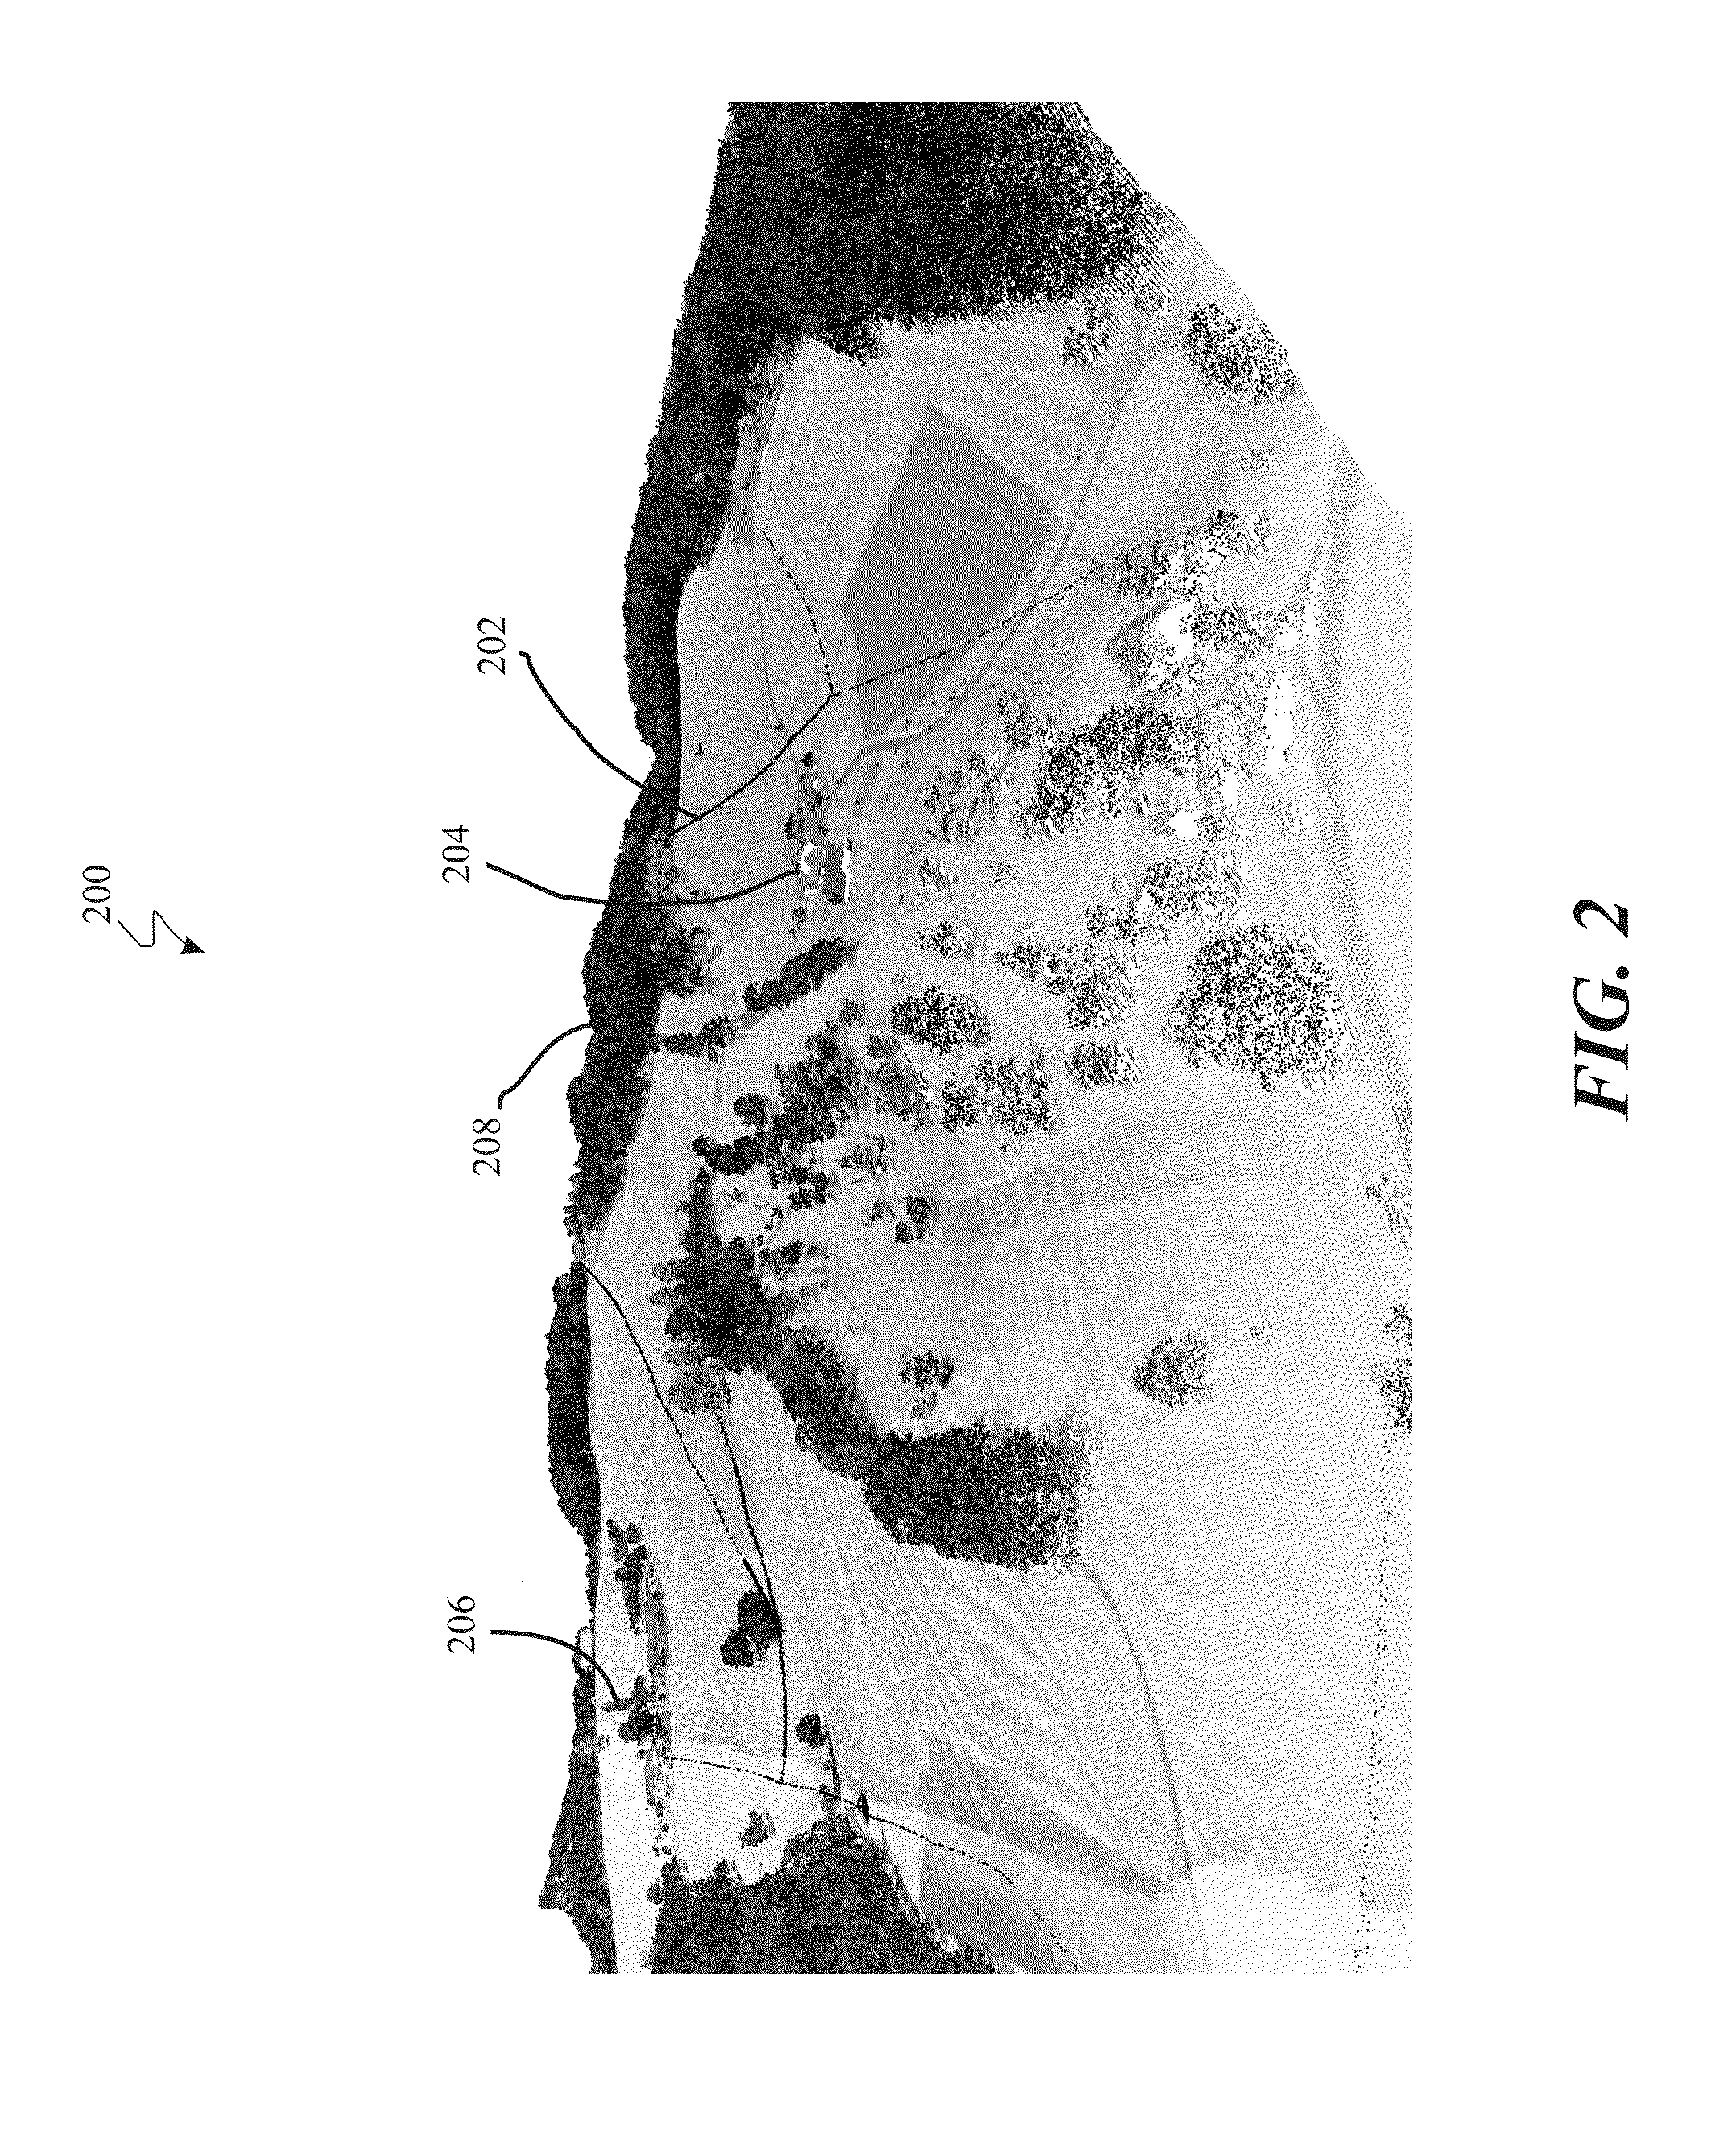 Light detection and ranging (LiDAR)data compression and decompression methods and apparatus